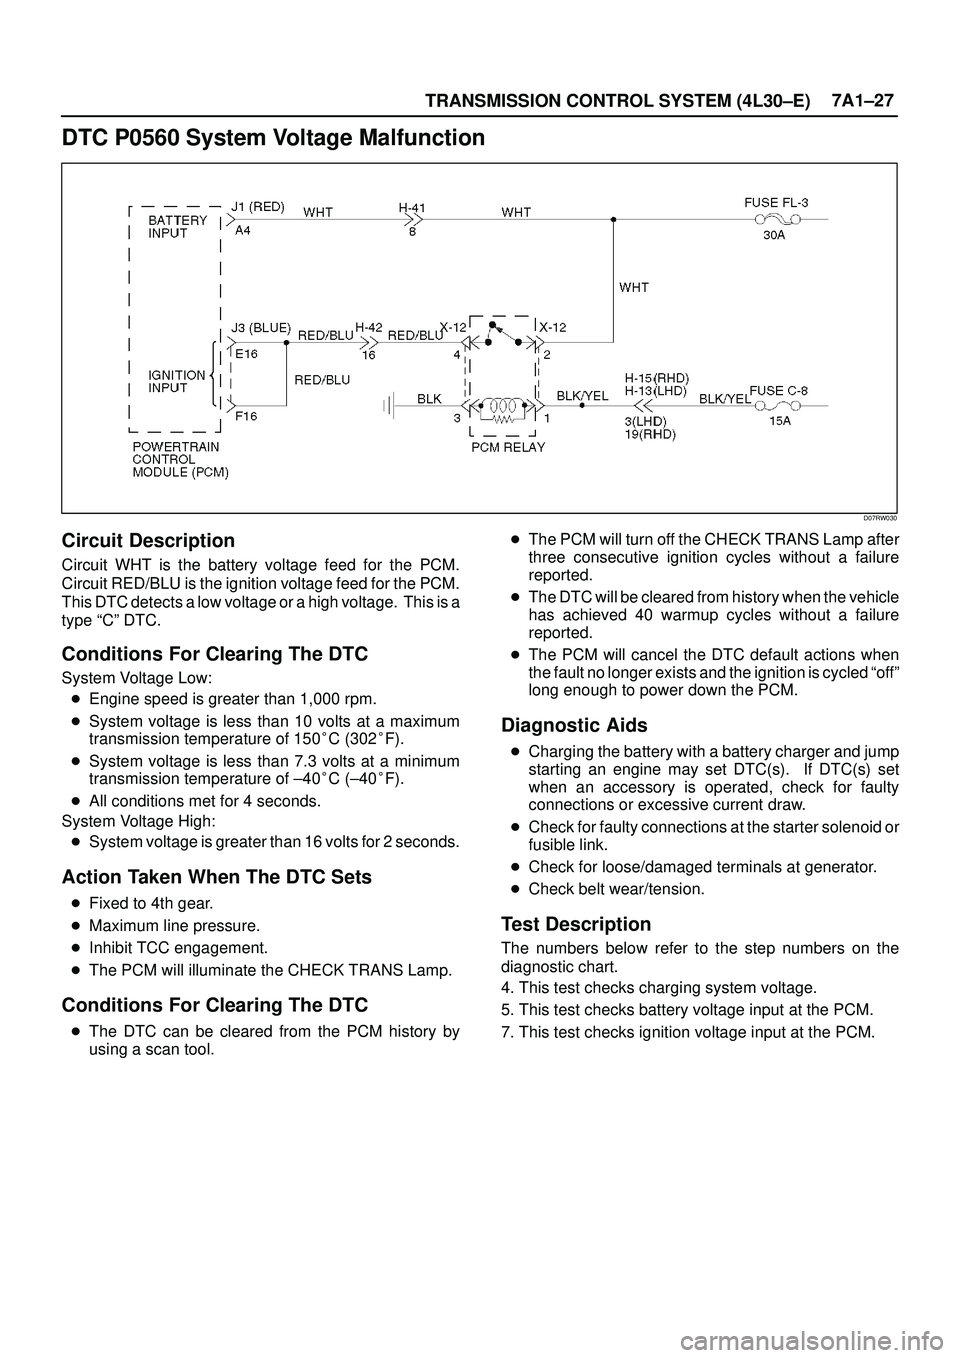 ISUZU TROOPER 1998  Service Manual PDF TRANSMISSION CONTROL SYSTEM (4L30±E)7A1±27
DTC P0560 System Voltage Malfunction
D07RW030
Circuit Description
Circuit WHT is the battery voltage feed for the PCM.
Circuit RED/BLU is the ignition volt